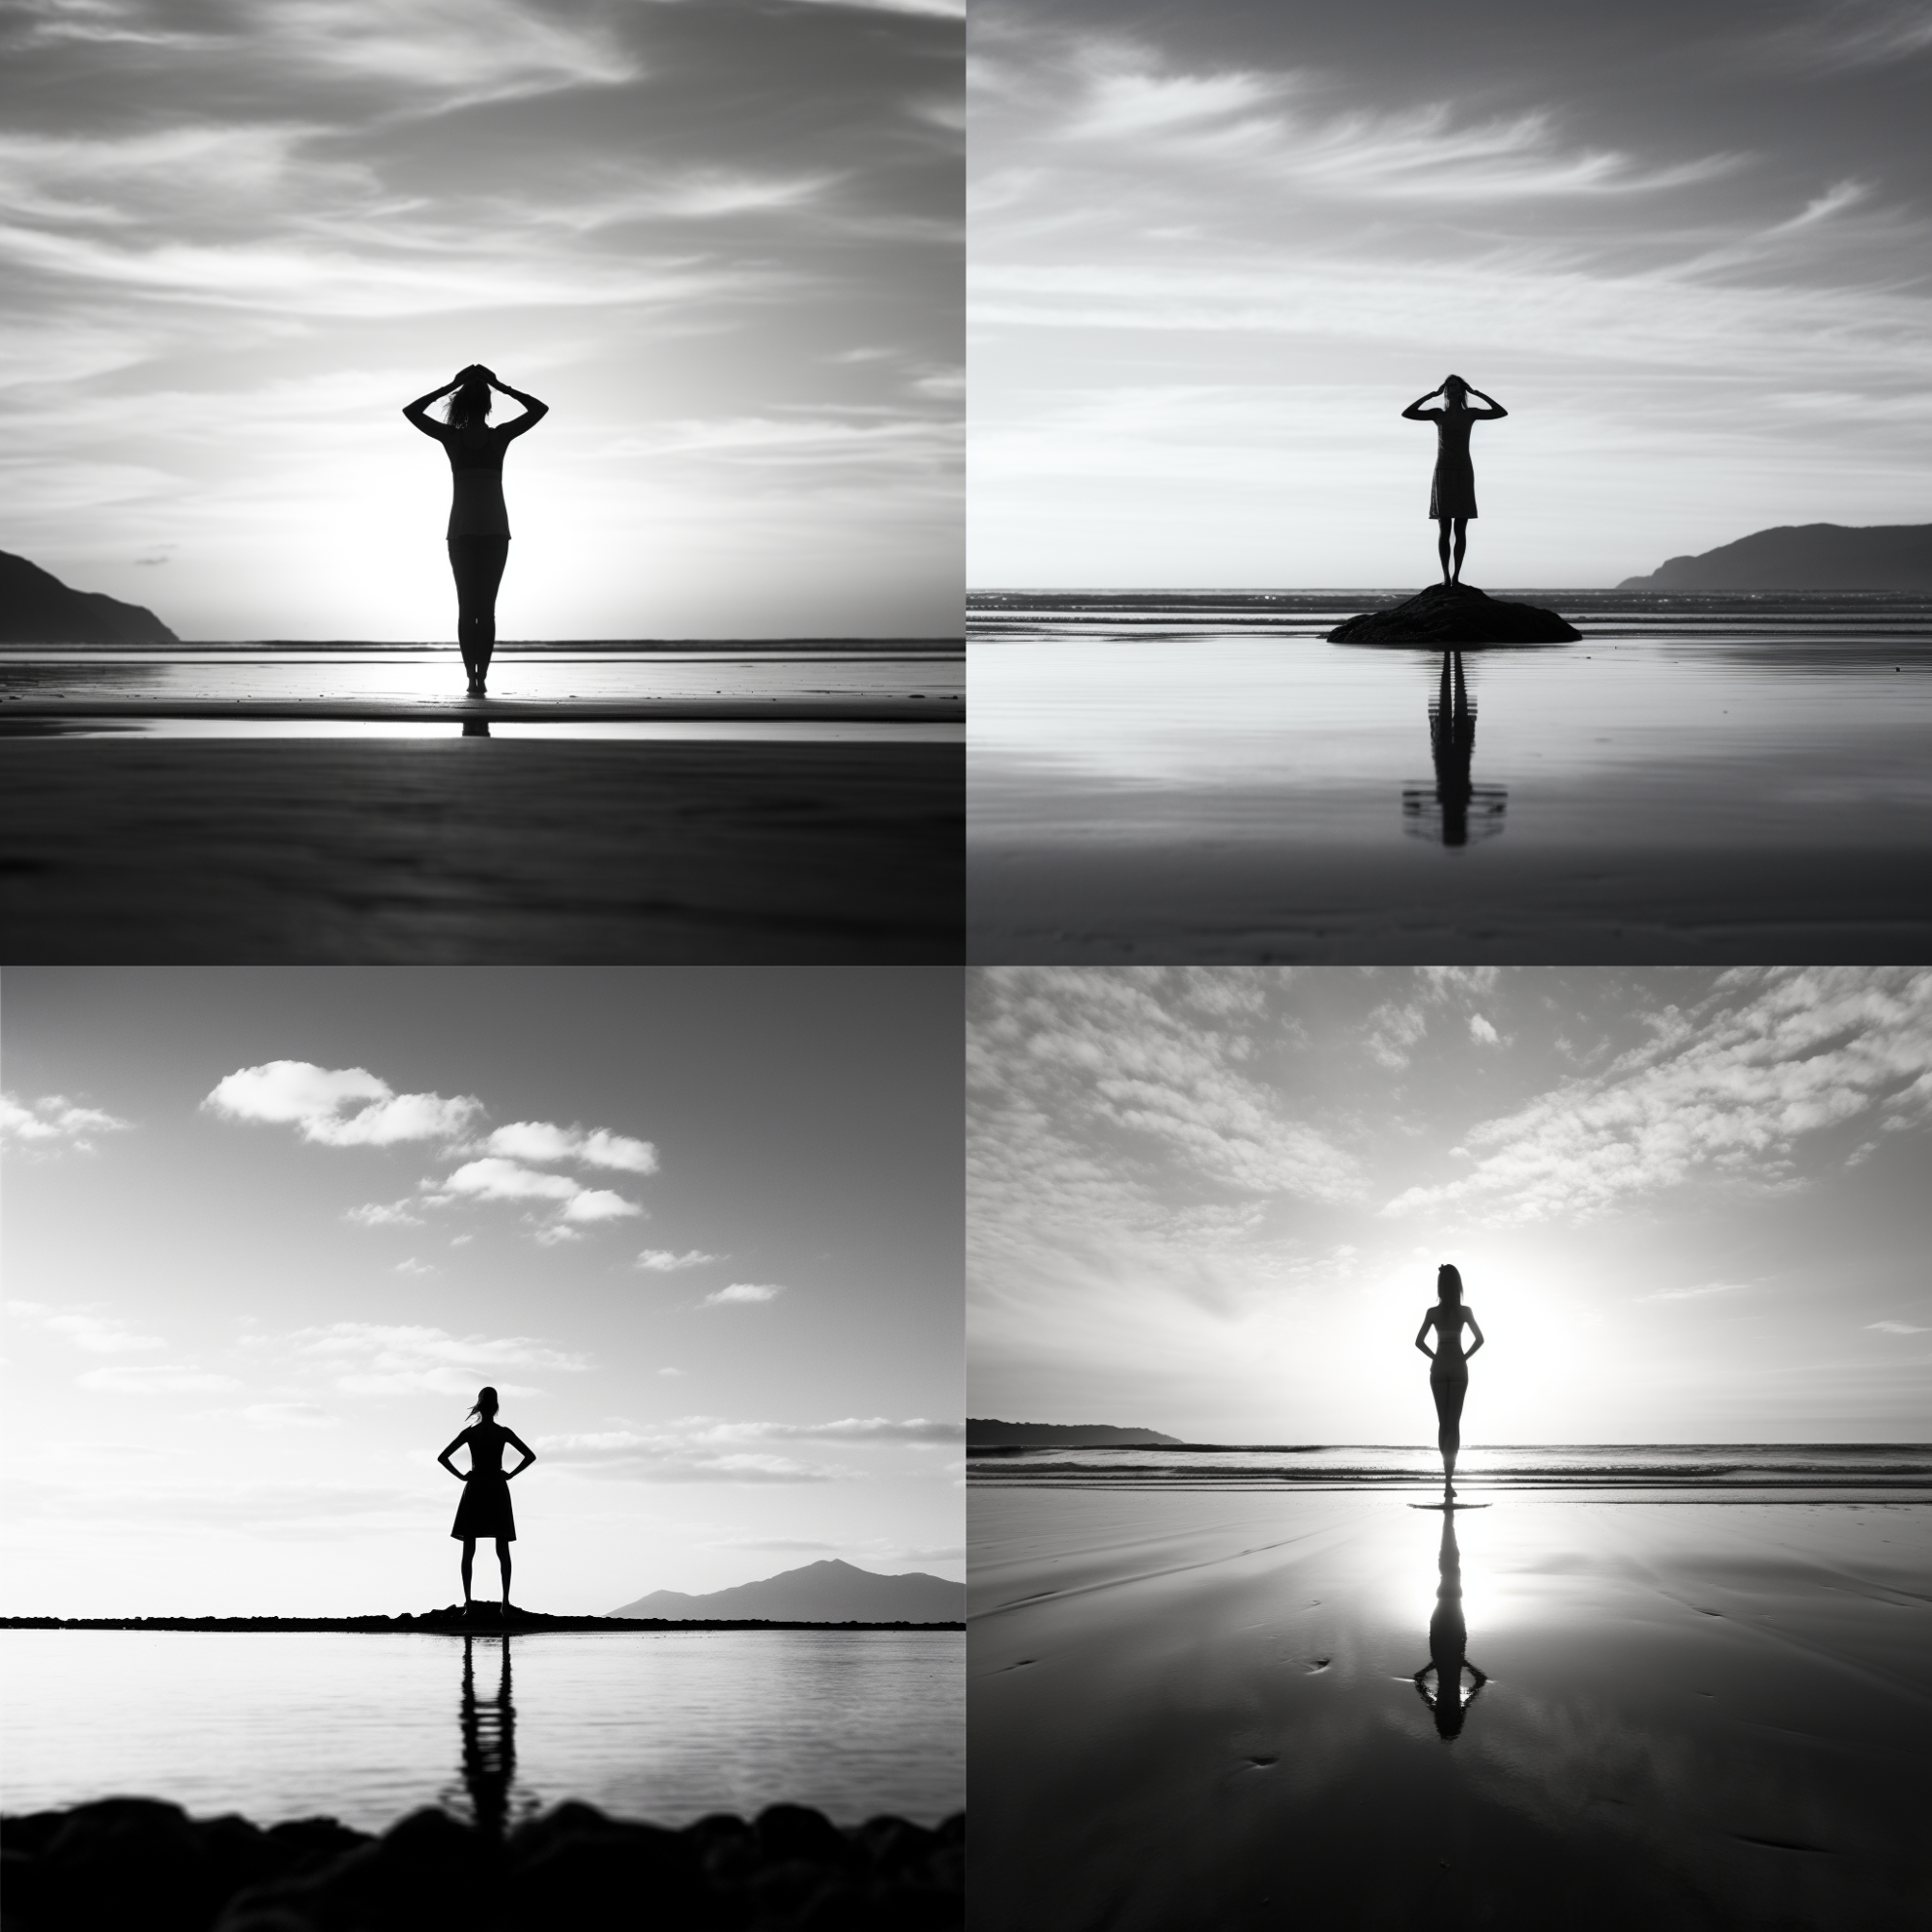 Four image options generated by Midjourney based on a beach yoga prompt